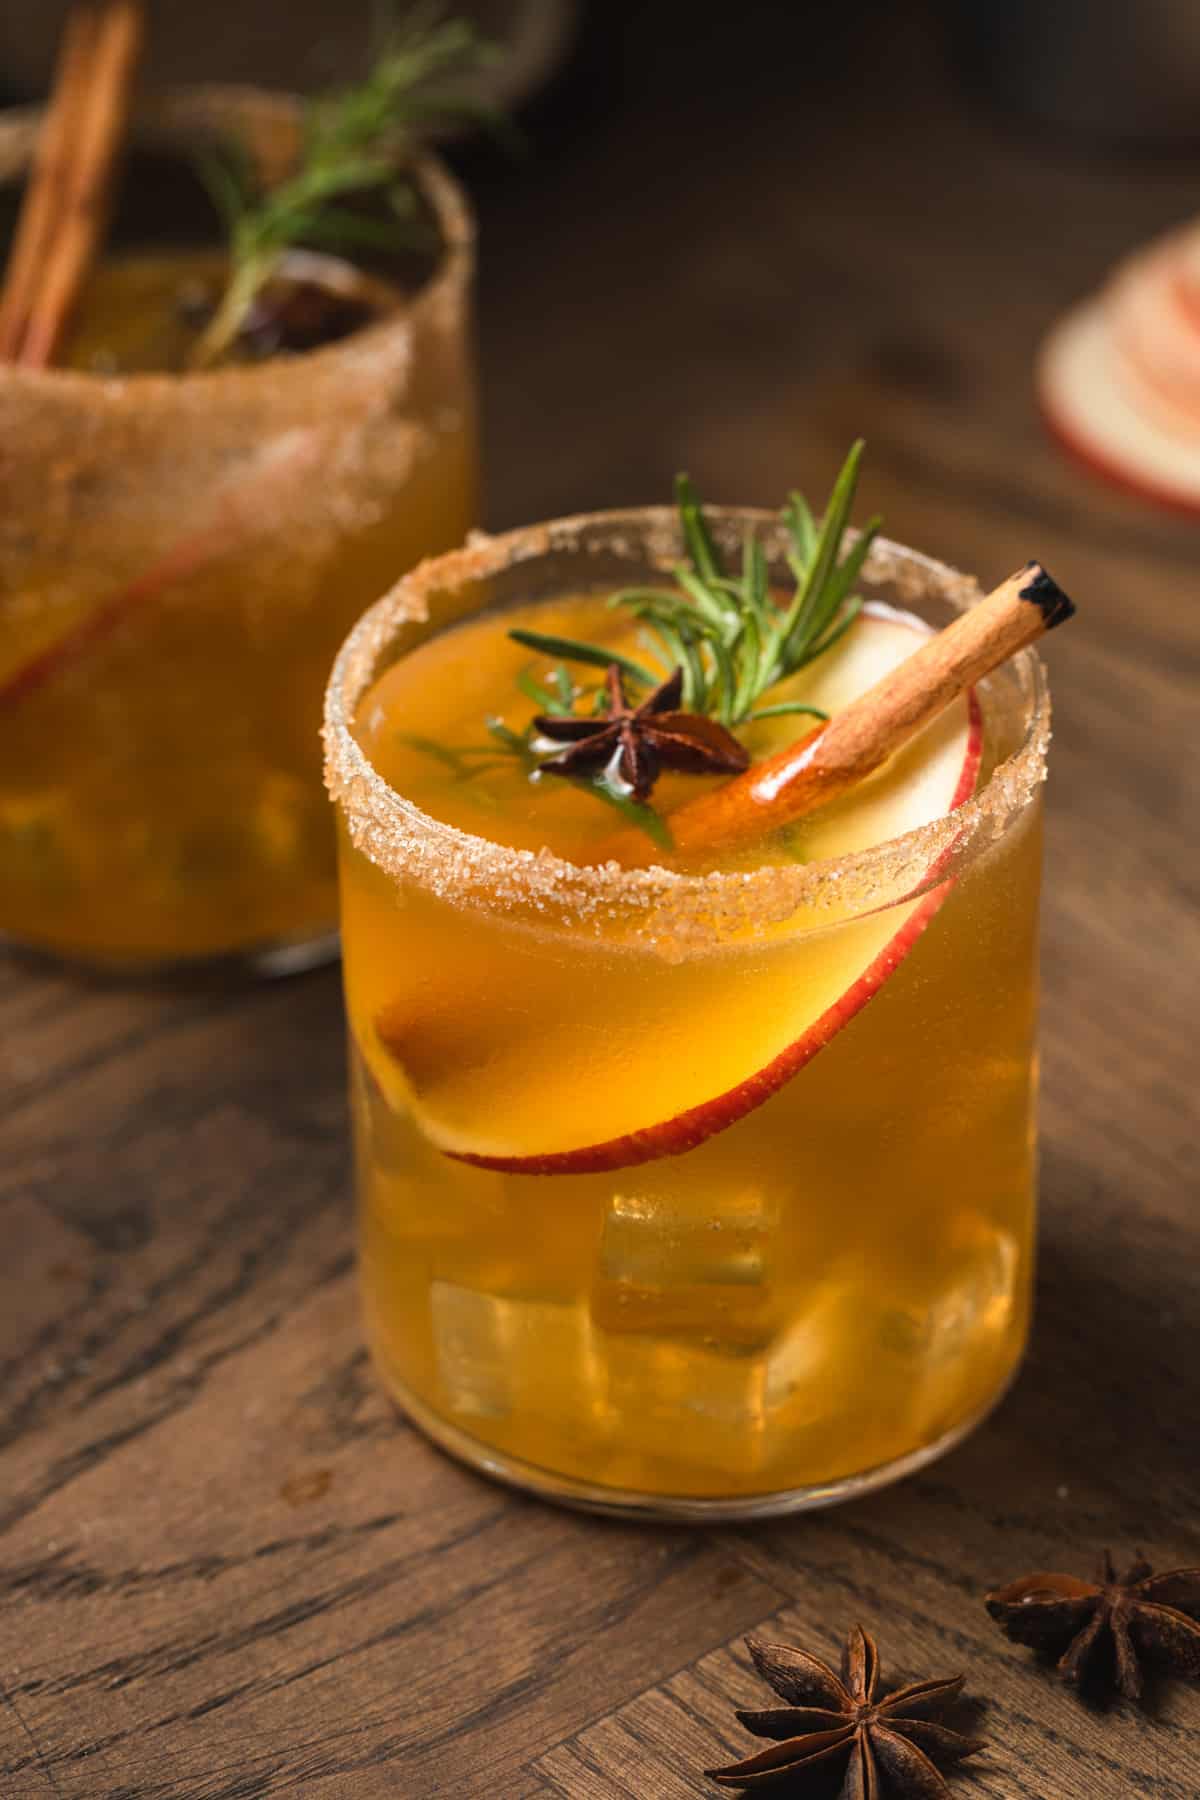 An apple cider gin margarita garnished in a glass on a wood surface.